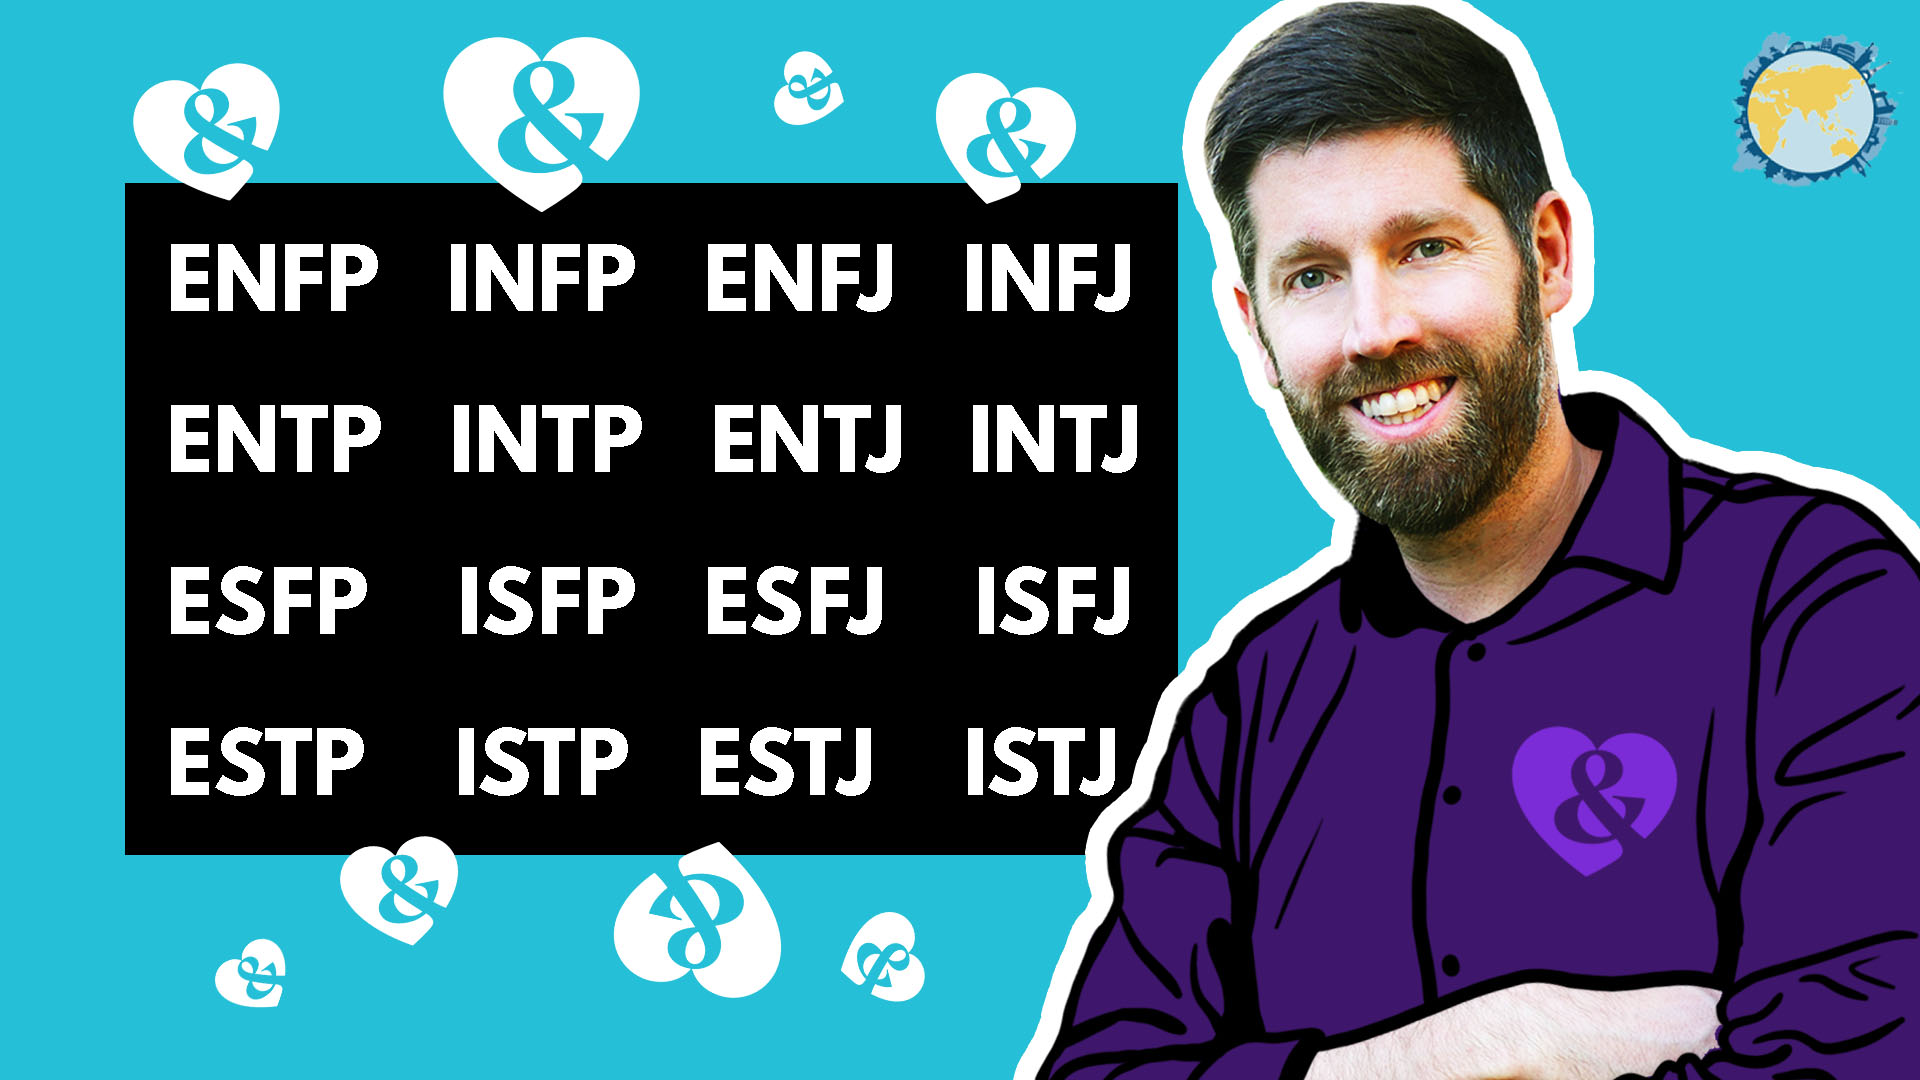 INTJ Relationships: Friendships, Love, and Work Compatibility